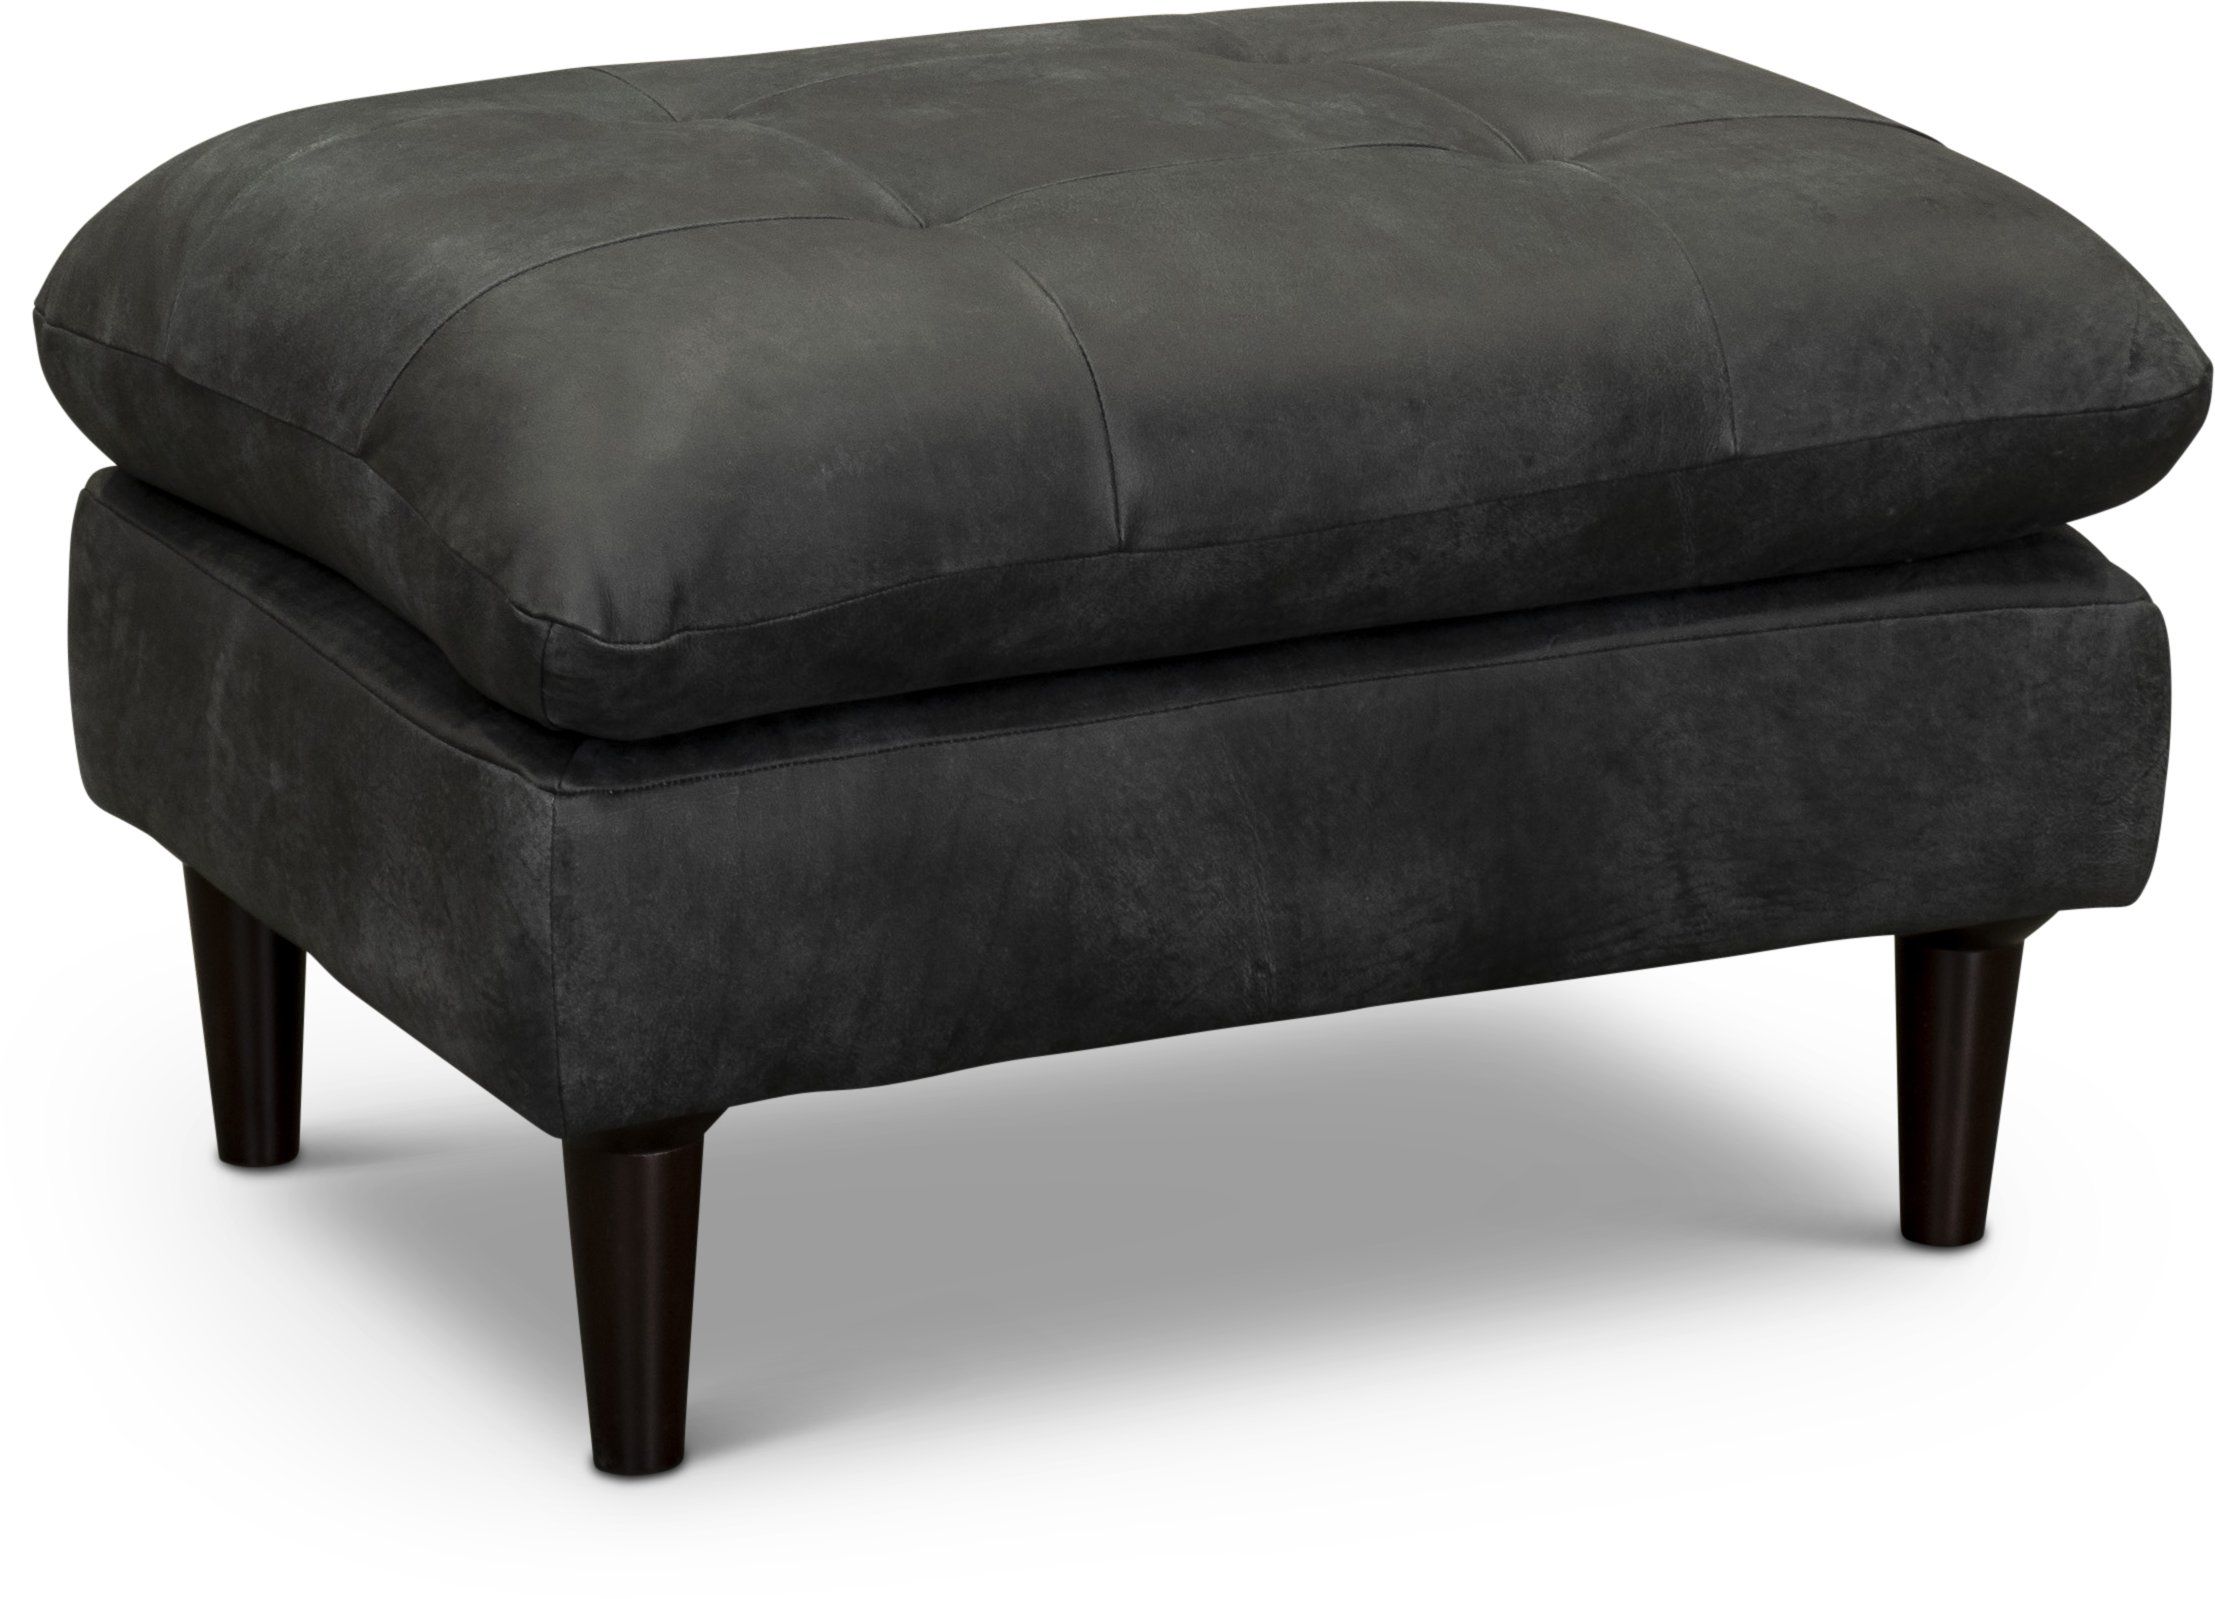 Chateau D'ax Contemporary Black Leather Ottoman – Ivan From R.c (View 20 of 20)